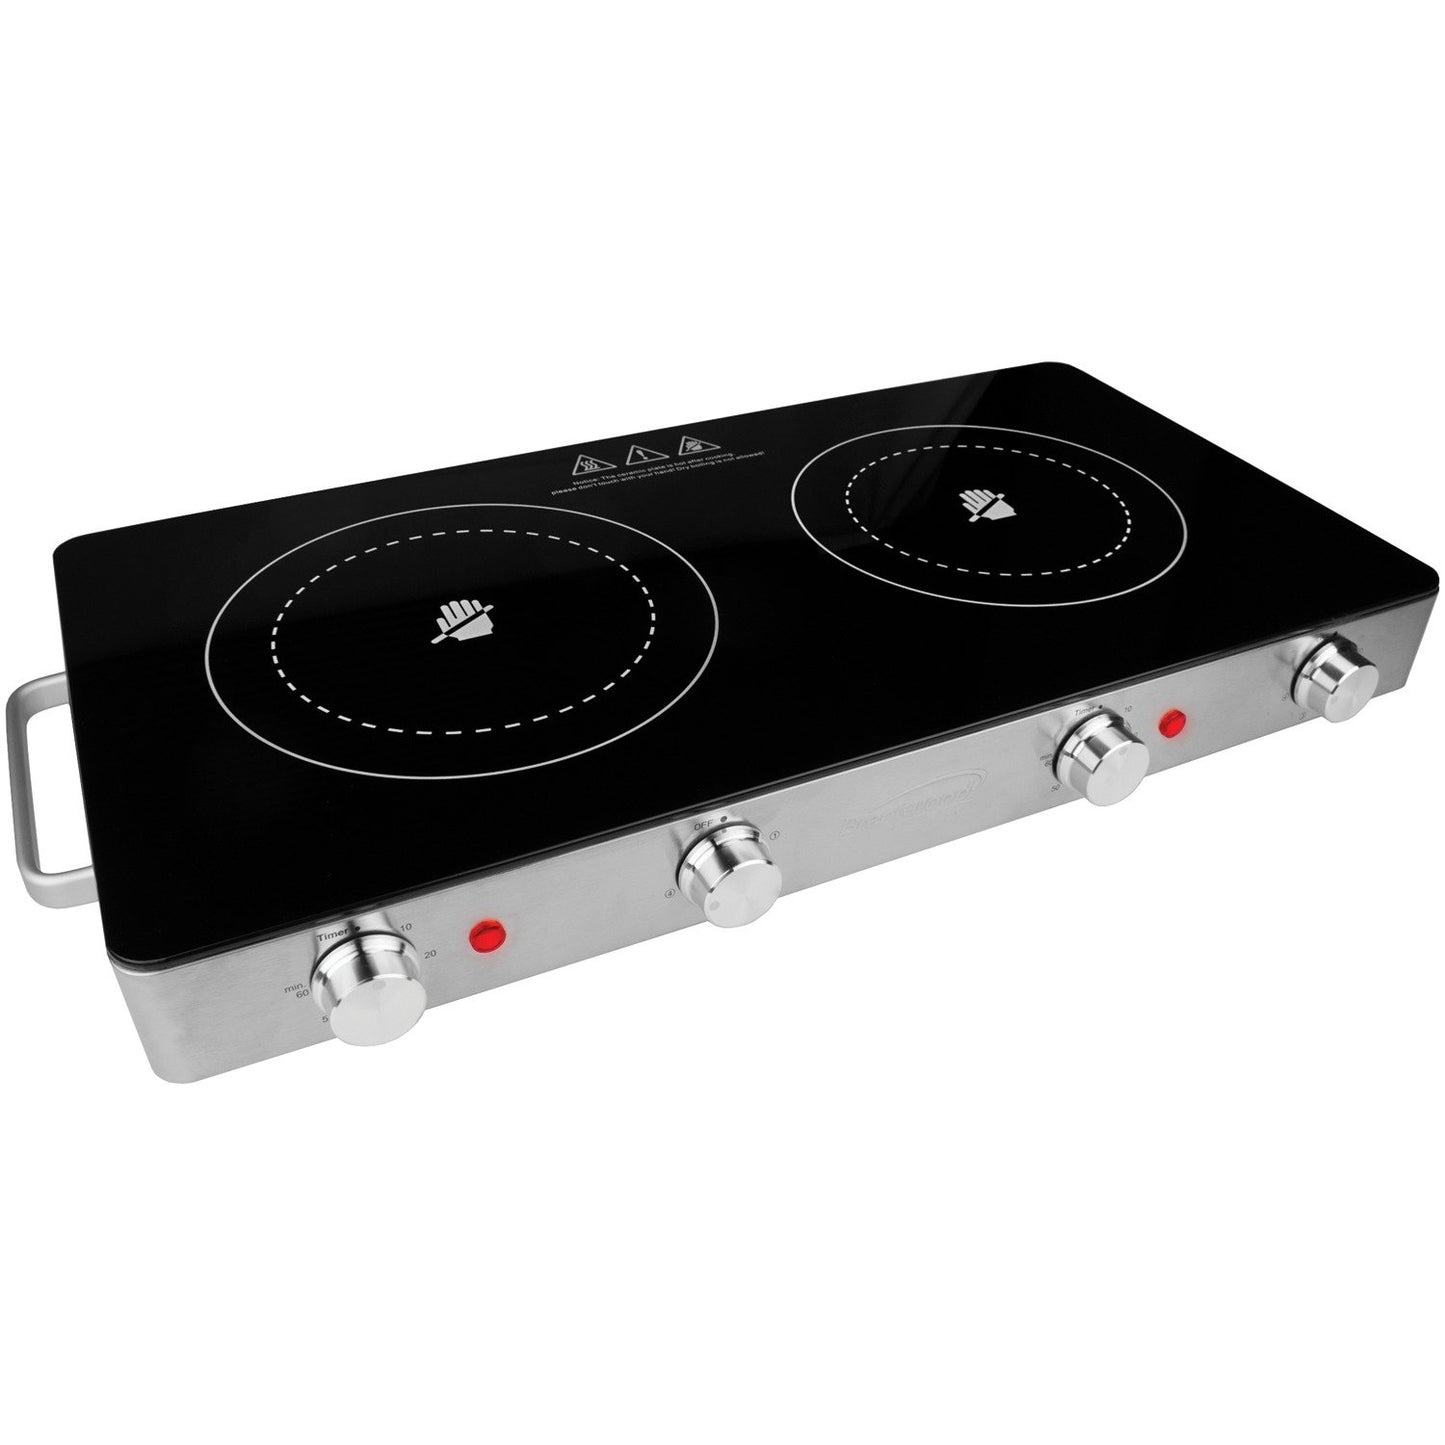 Brentwood Appl. TS-382 1,800W Double Infrared Electric Countertop Burner